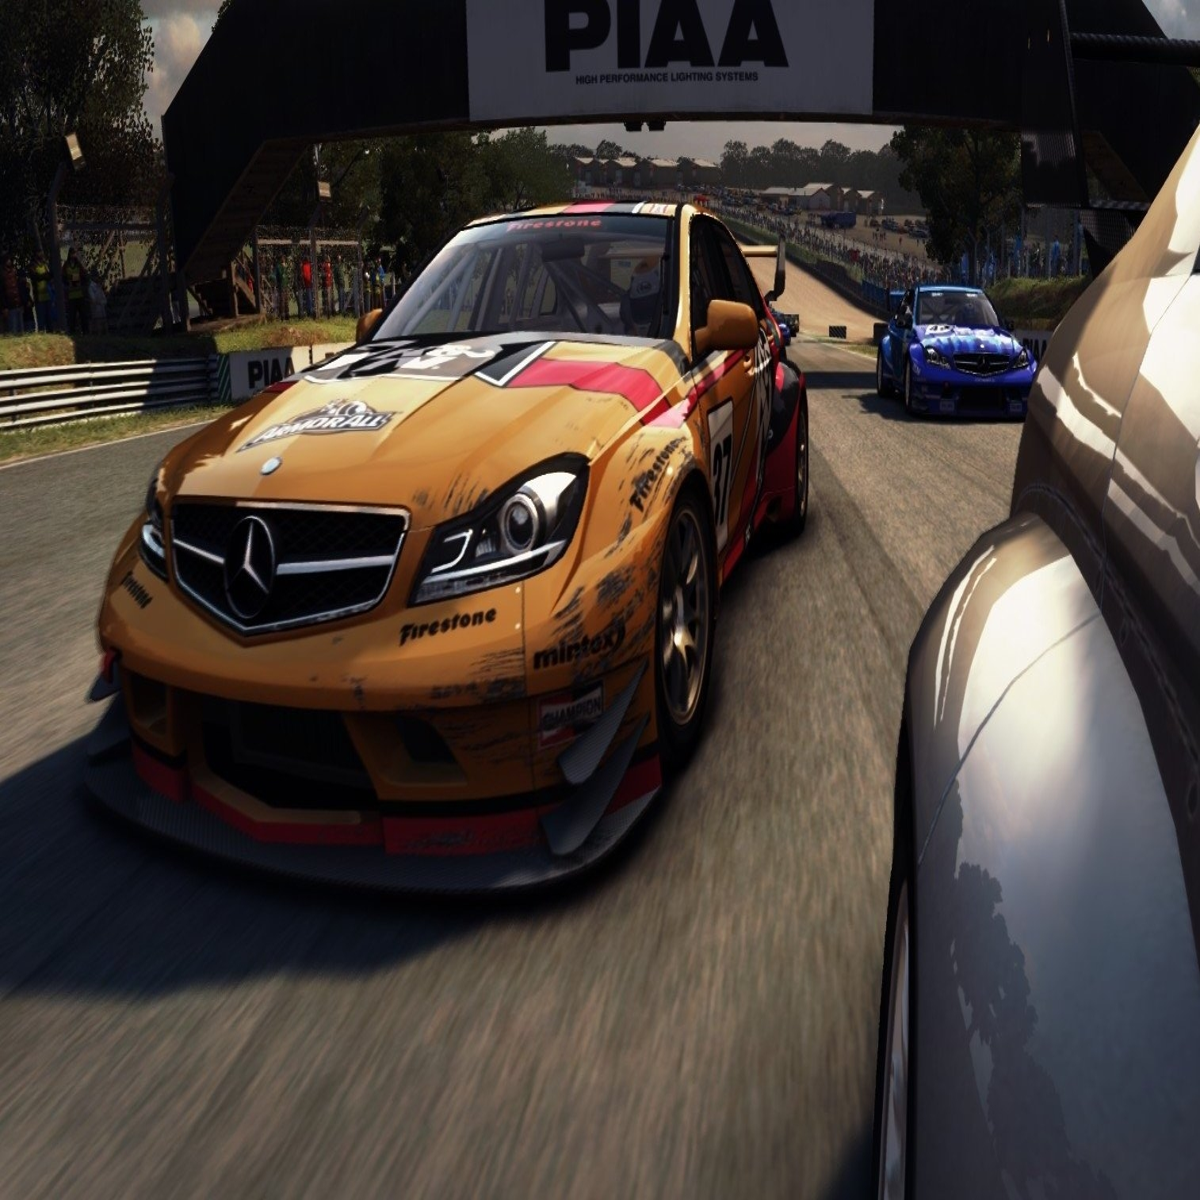 Grid Autosport Preview - Racing Through The Streets In Grid Autosport -  Game Informer